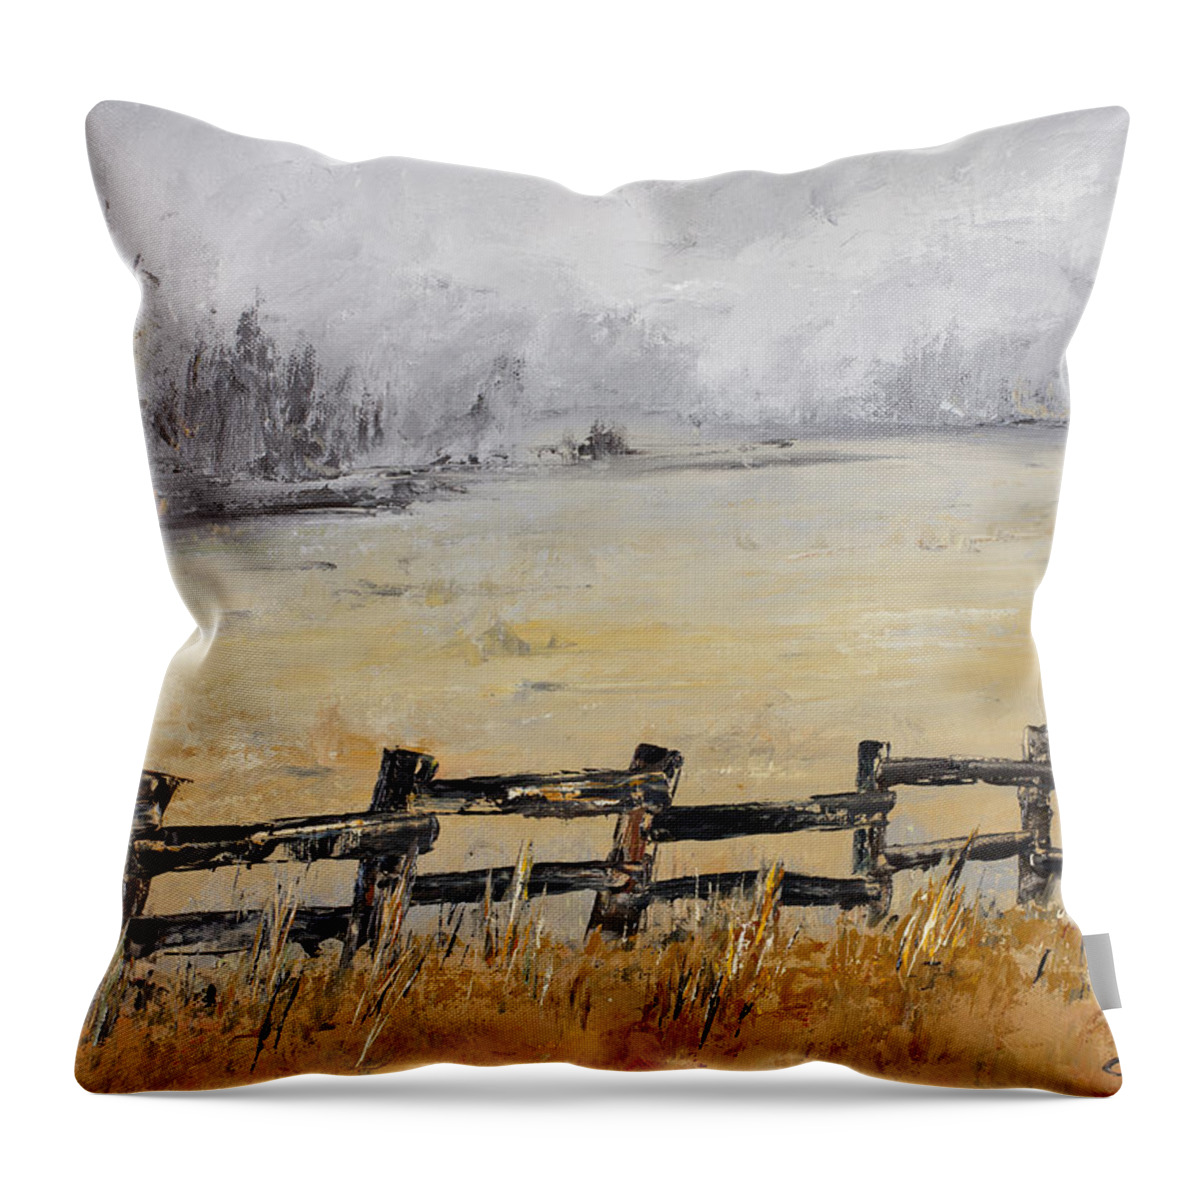 Fences Throw Pillow featuring the painting Old Fence Row by Carolyn Doe